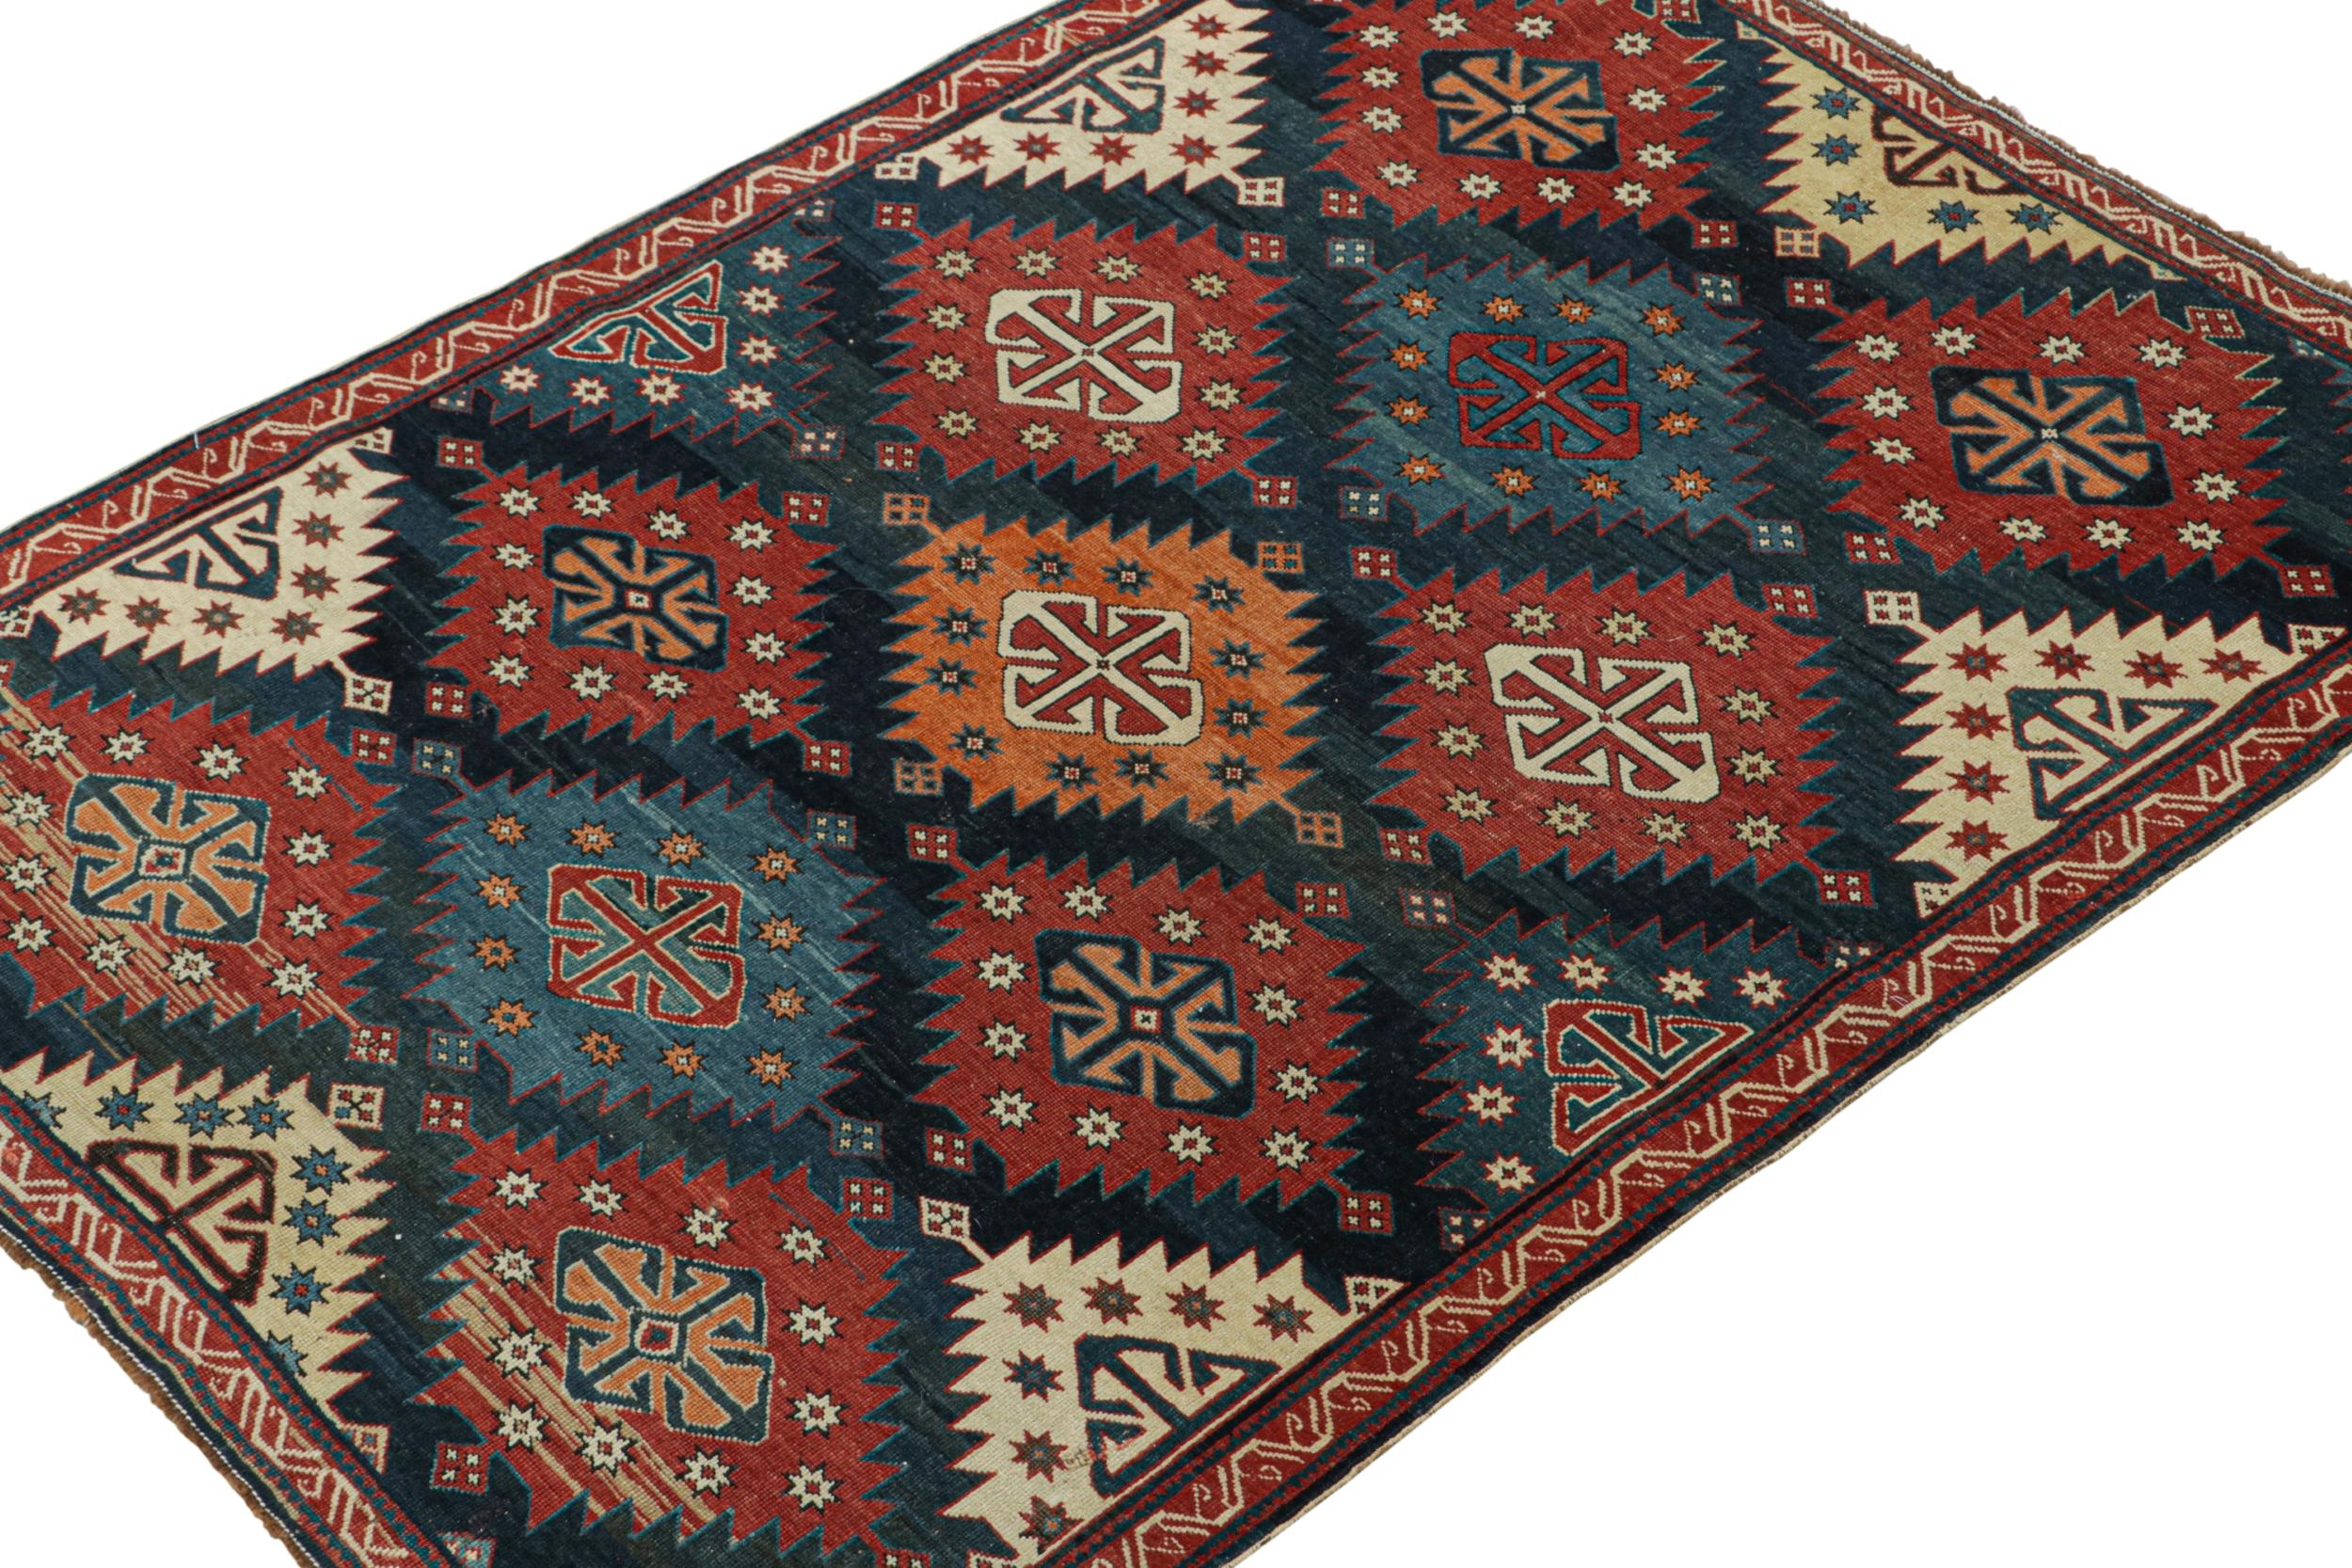 Hand-Knotted Antique Caucasian Kazak Rug in Red & Blue Tribal Patterns from Rug & Kilim For Sale